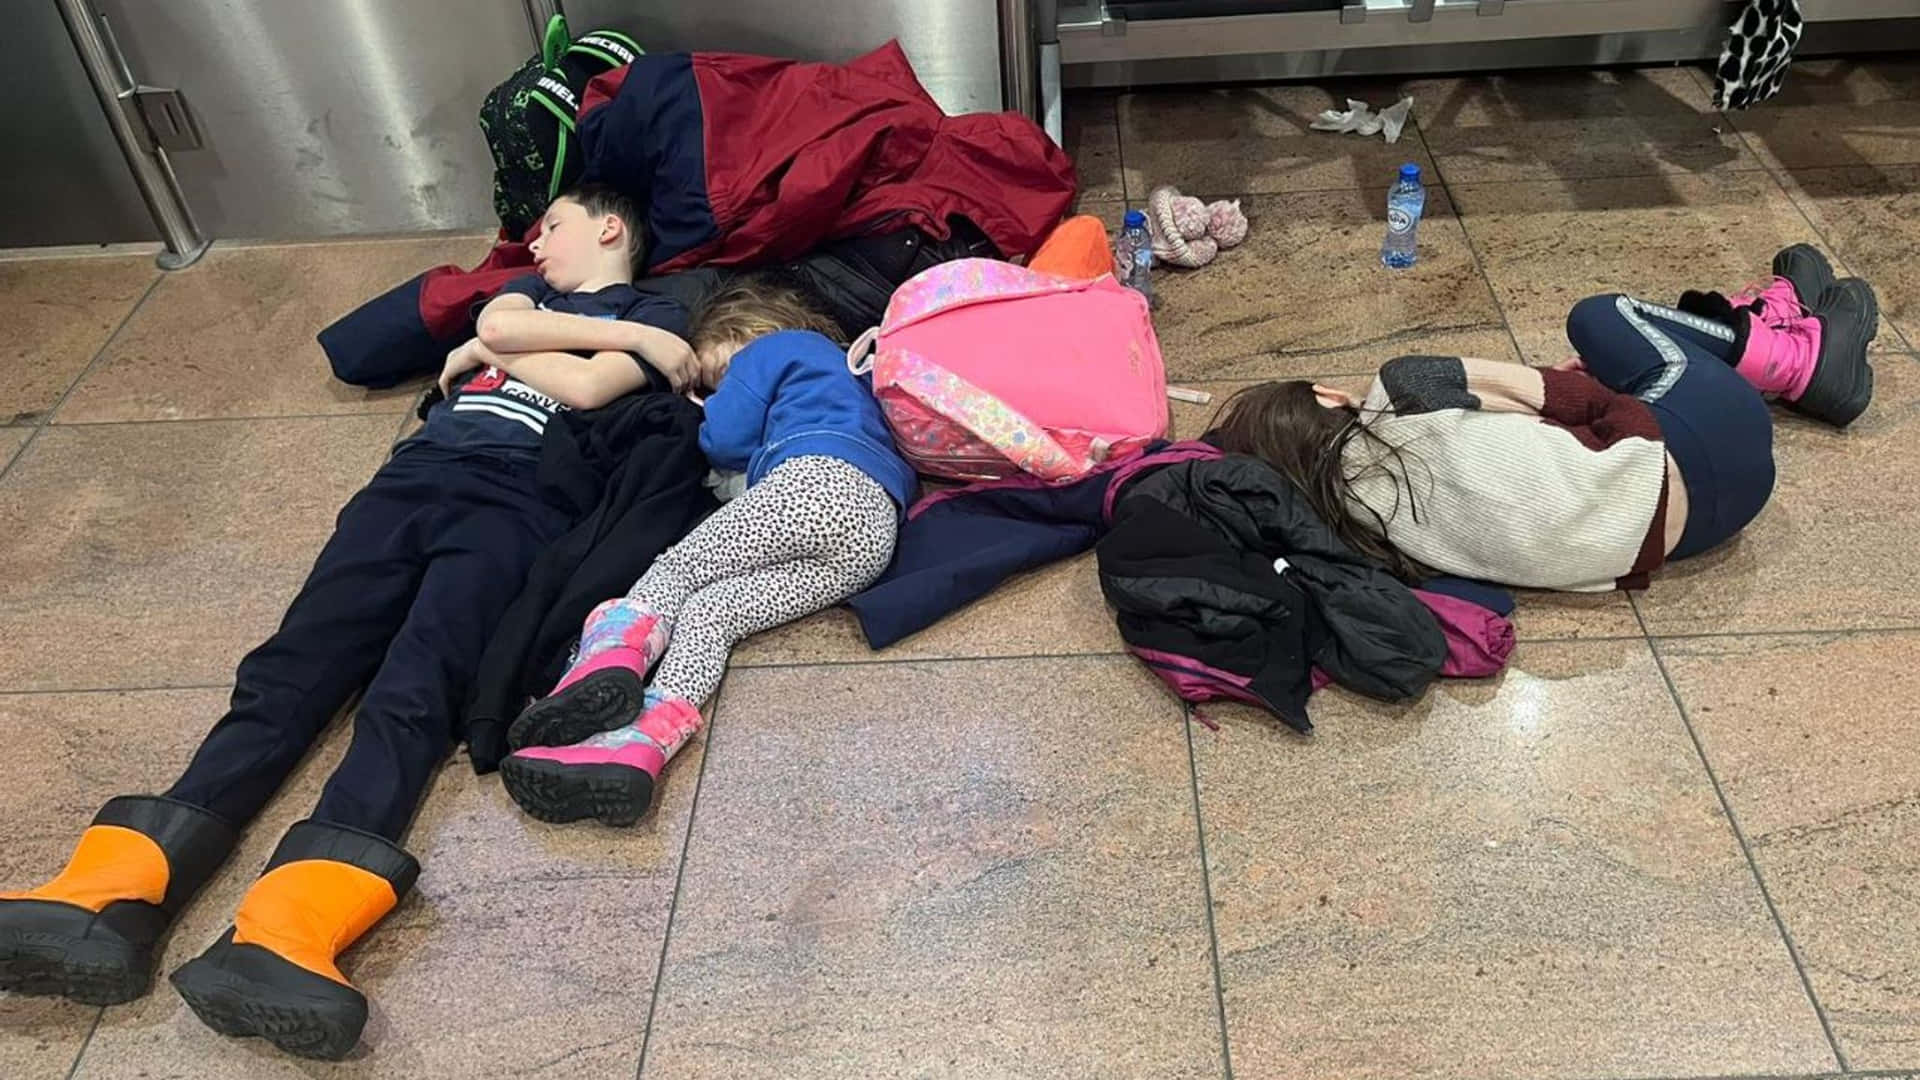 A Group Of Children Are Sleeping On The Floor Of An Airport